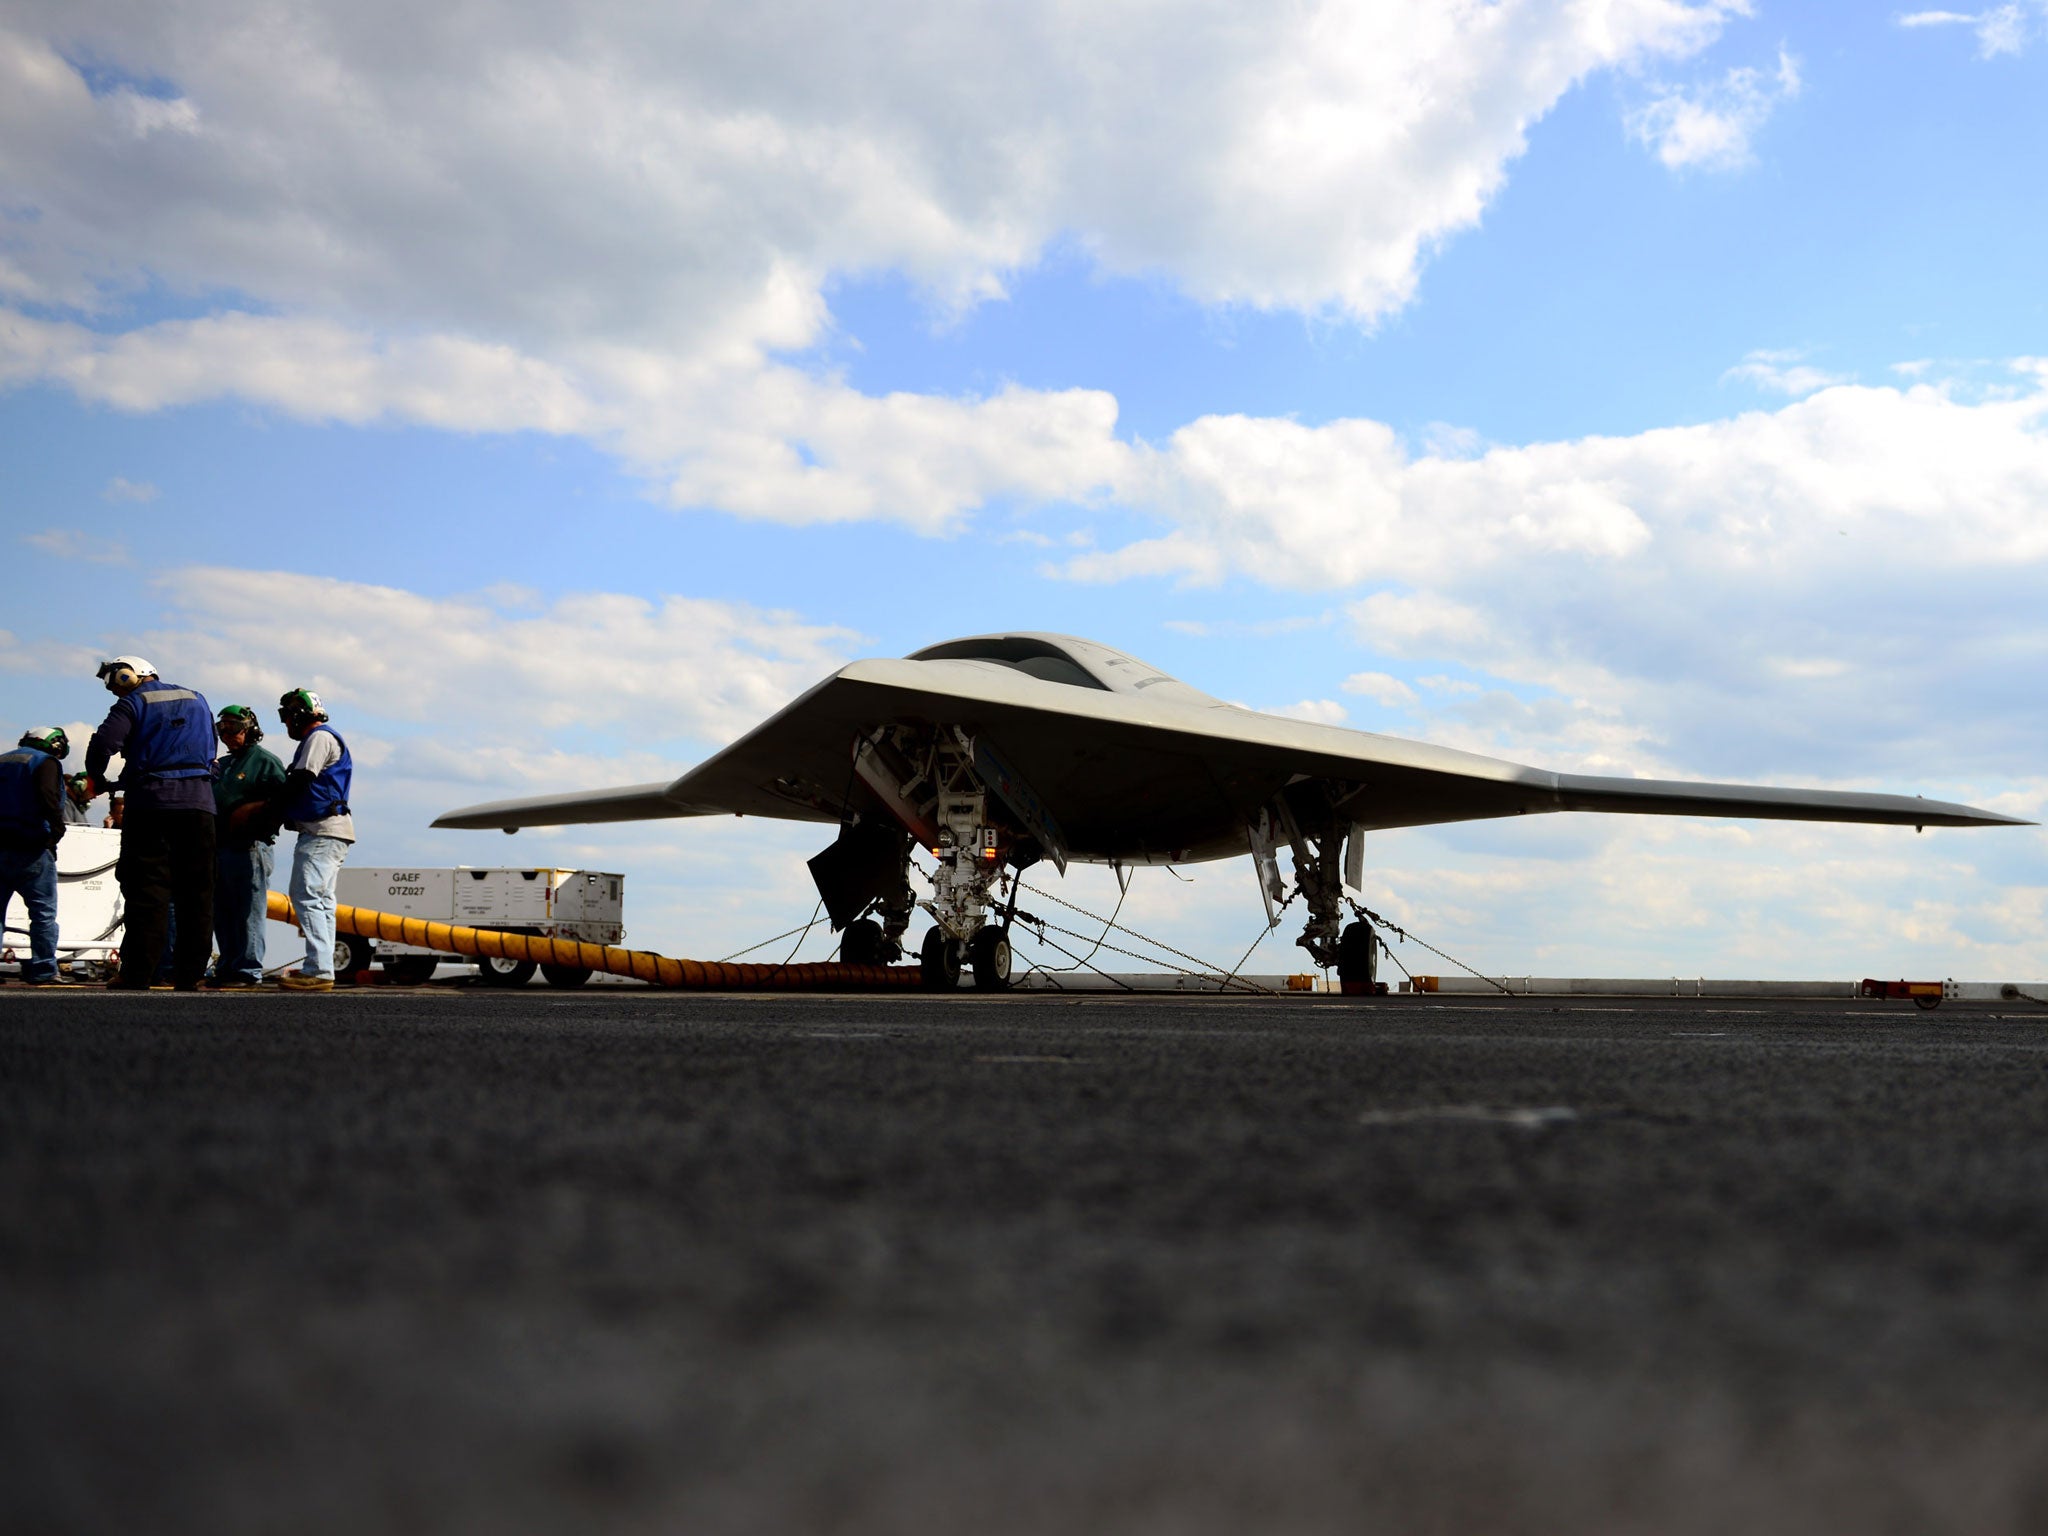 Northrop Grumman personnel conduct pre-operational tests on an X-47B Unmanned Combat Air System (UCAS) demonstrator on the flight deck of the aircraft carrier USS George H.W. Bush